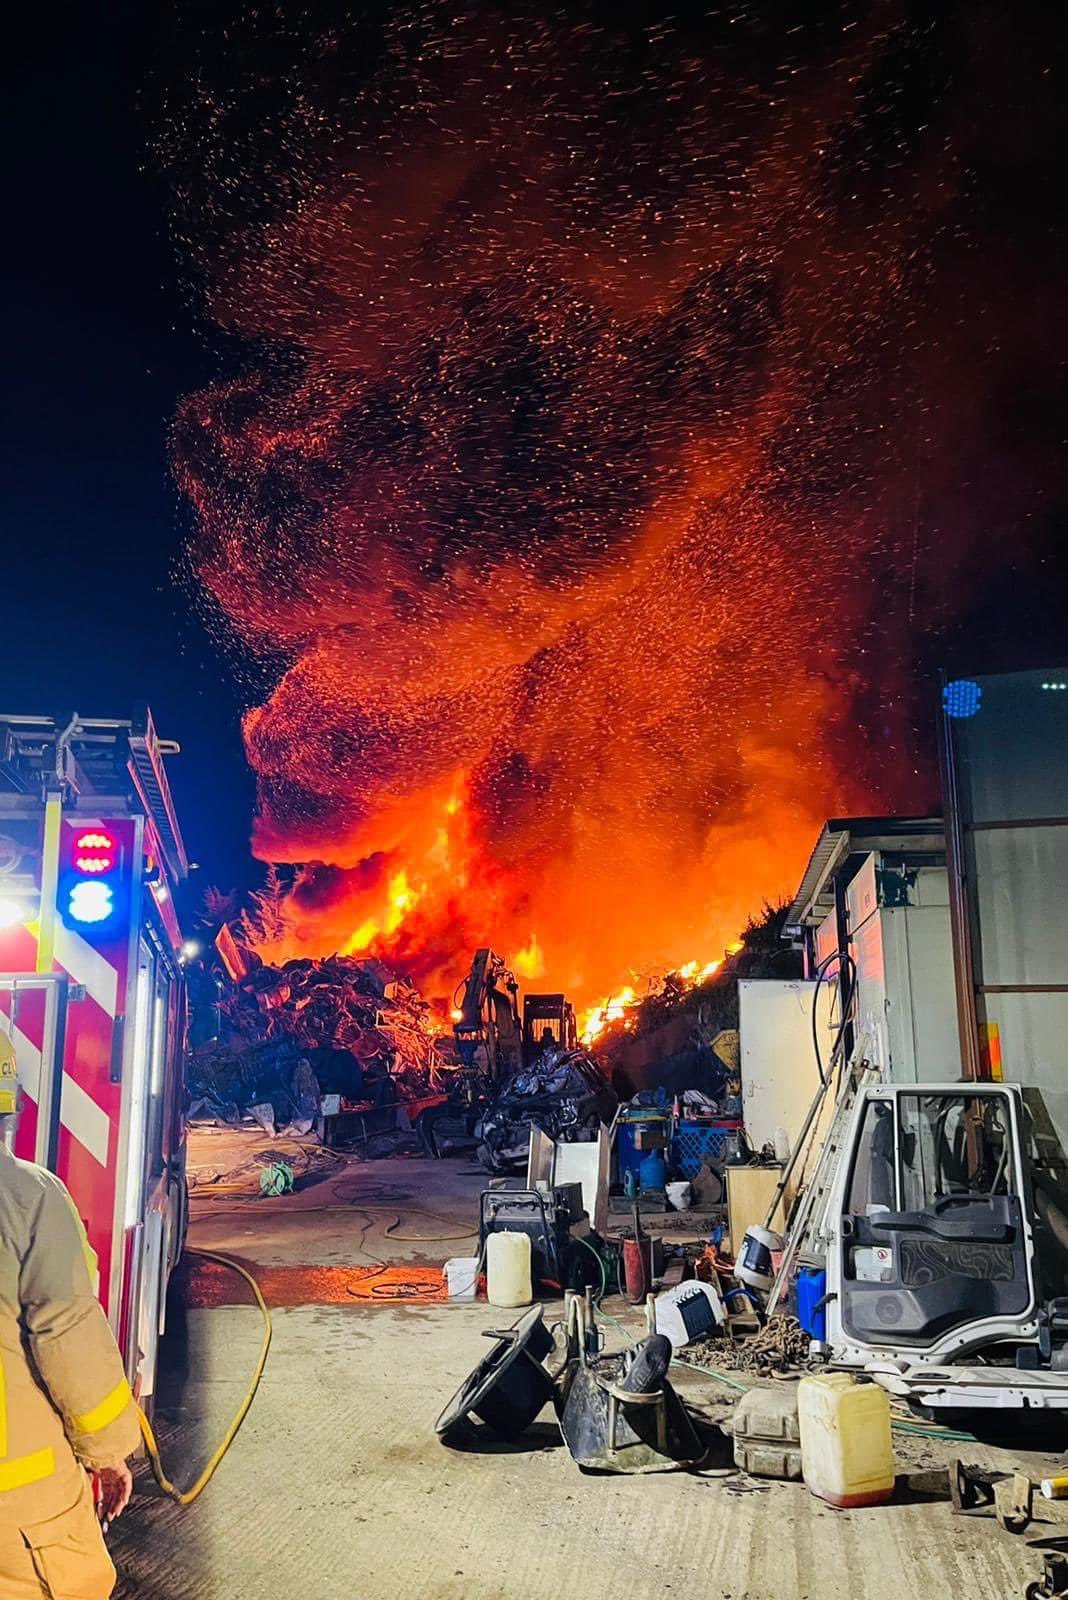 Five Turnings scrap yard fire near Knighton on Monday evening (August 8, 2022). Picture by James Lewis/Shropshire Fire and Rescue Service